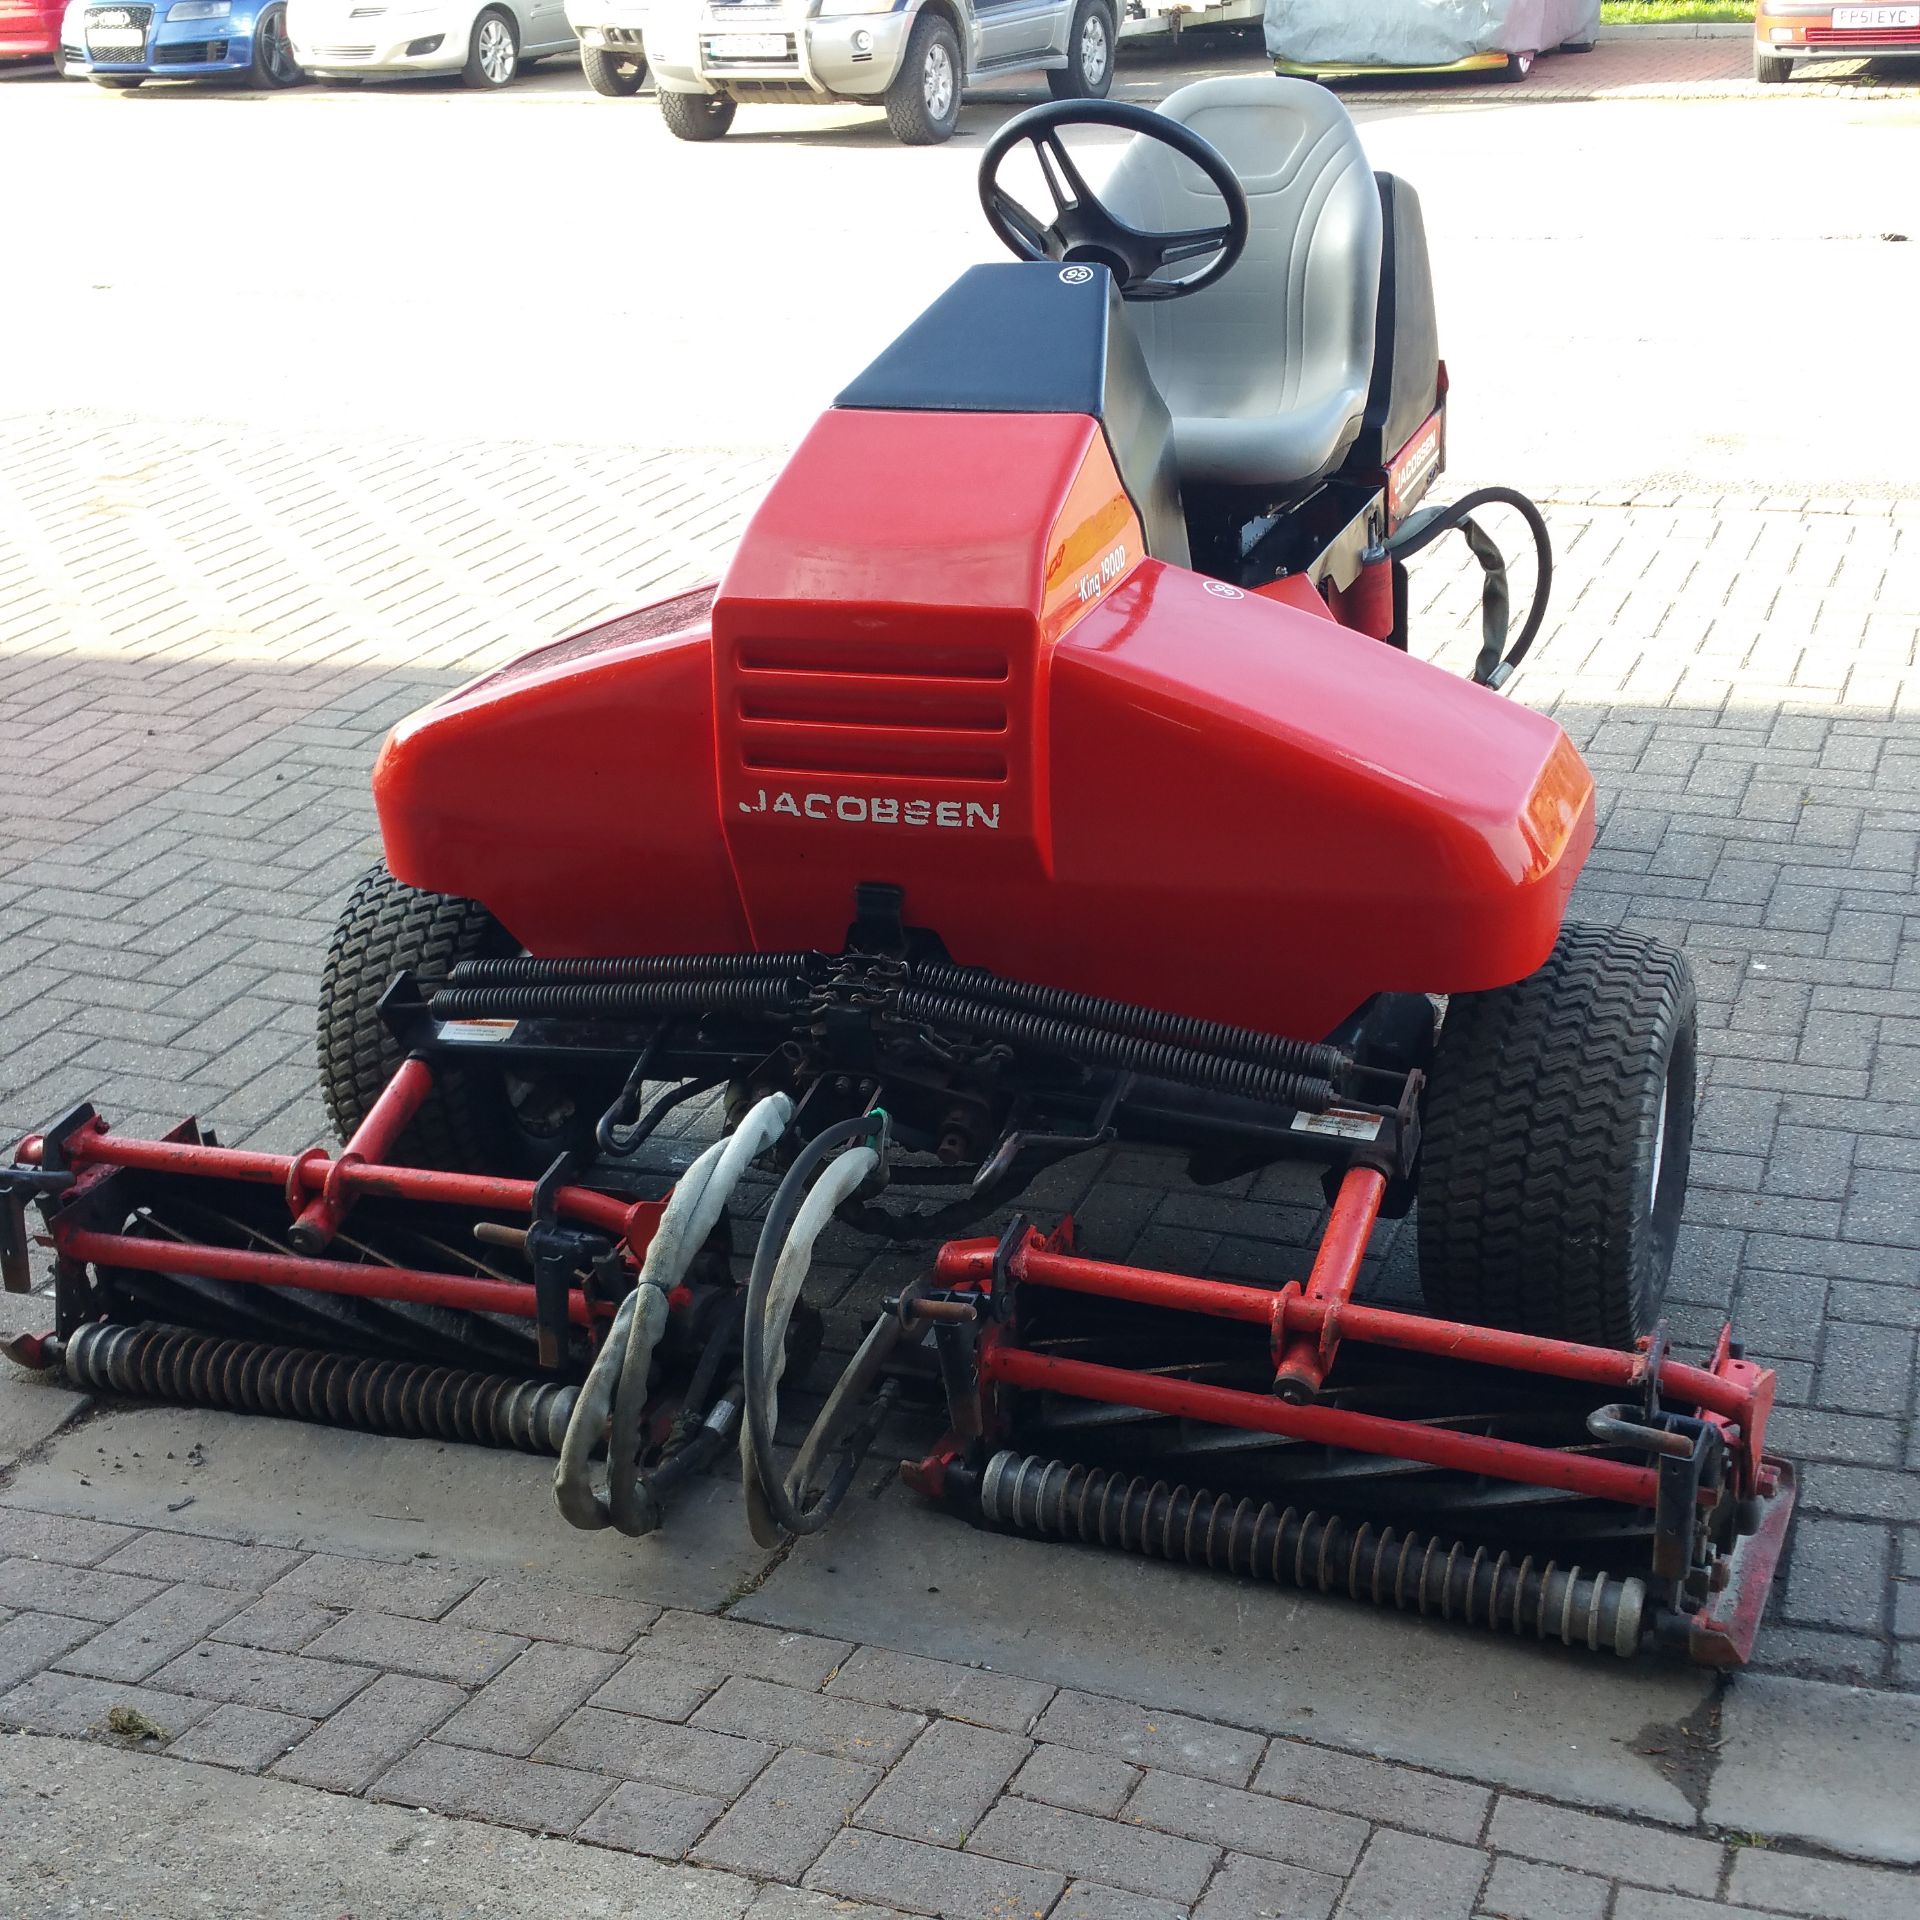 Jacobsen 1900D mower   Triple cylinder   3 cylinder diesel   Hydraulic lift   Hydrostatic drive - Image 3 of 5